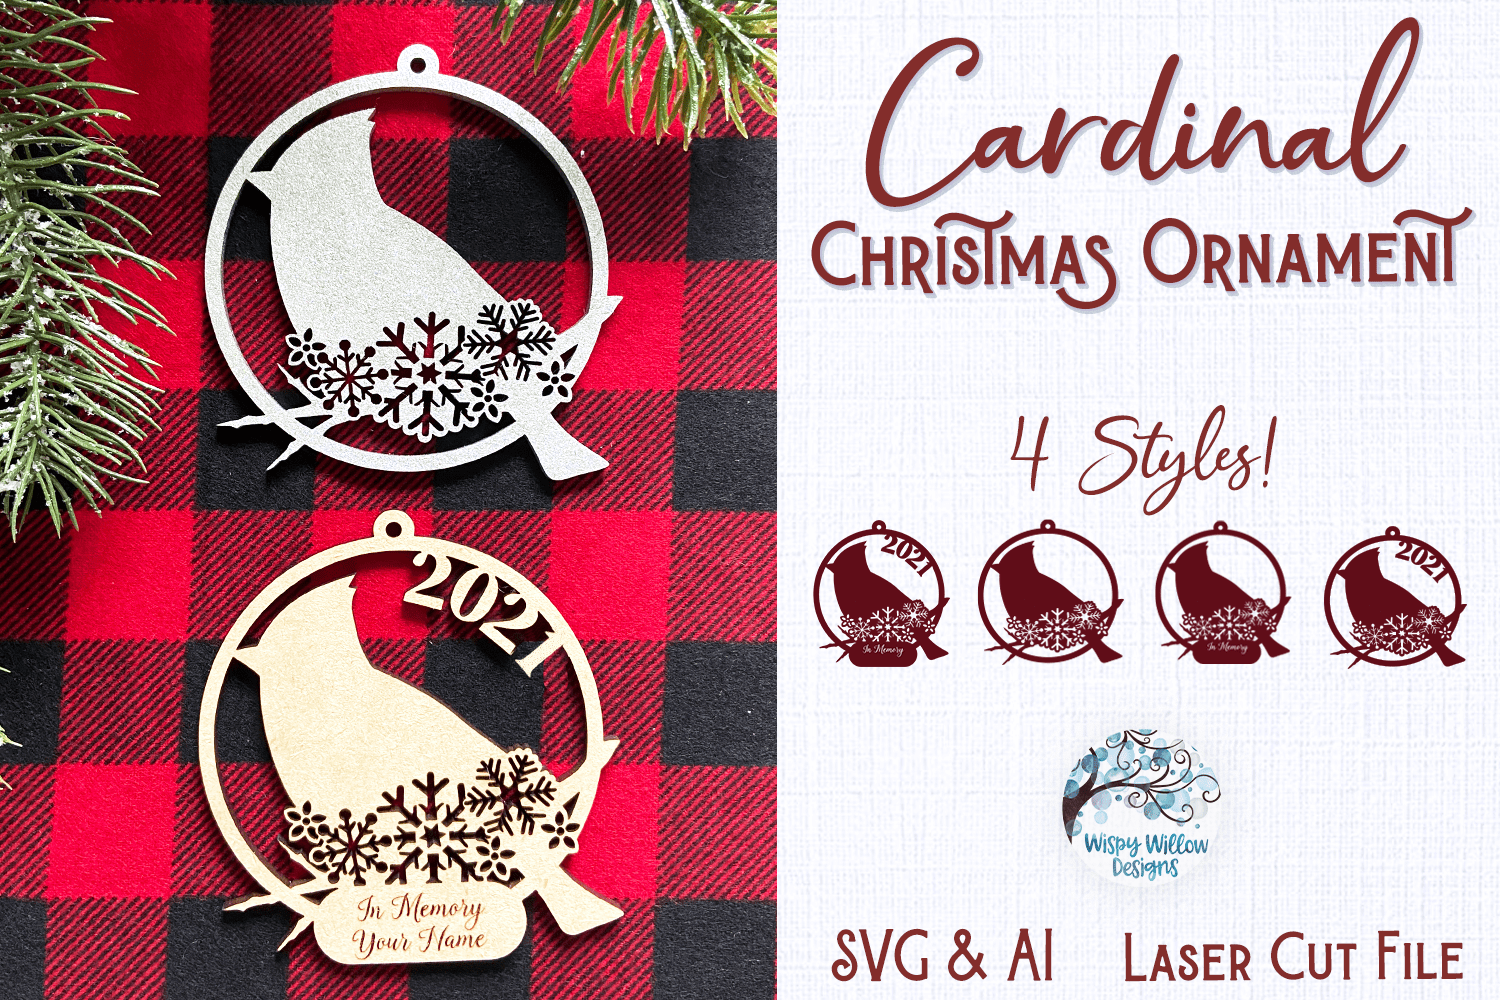 Cardinal Christmas Ornament for Glowforge or Laser Cutter Wispy Willow Designs Company